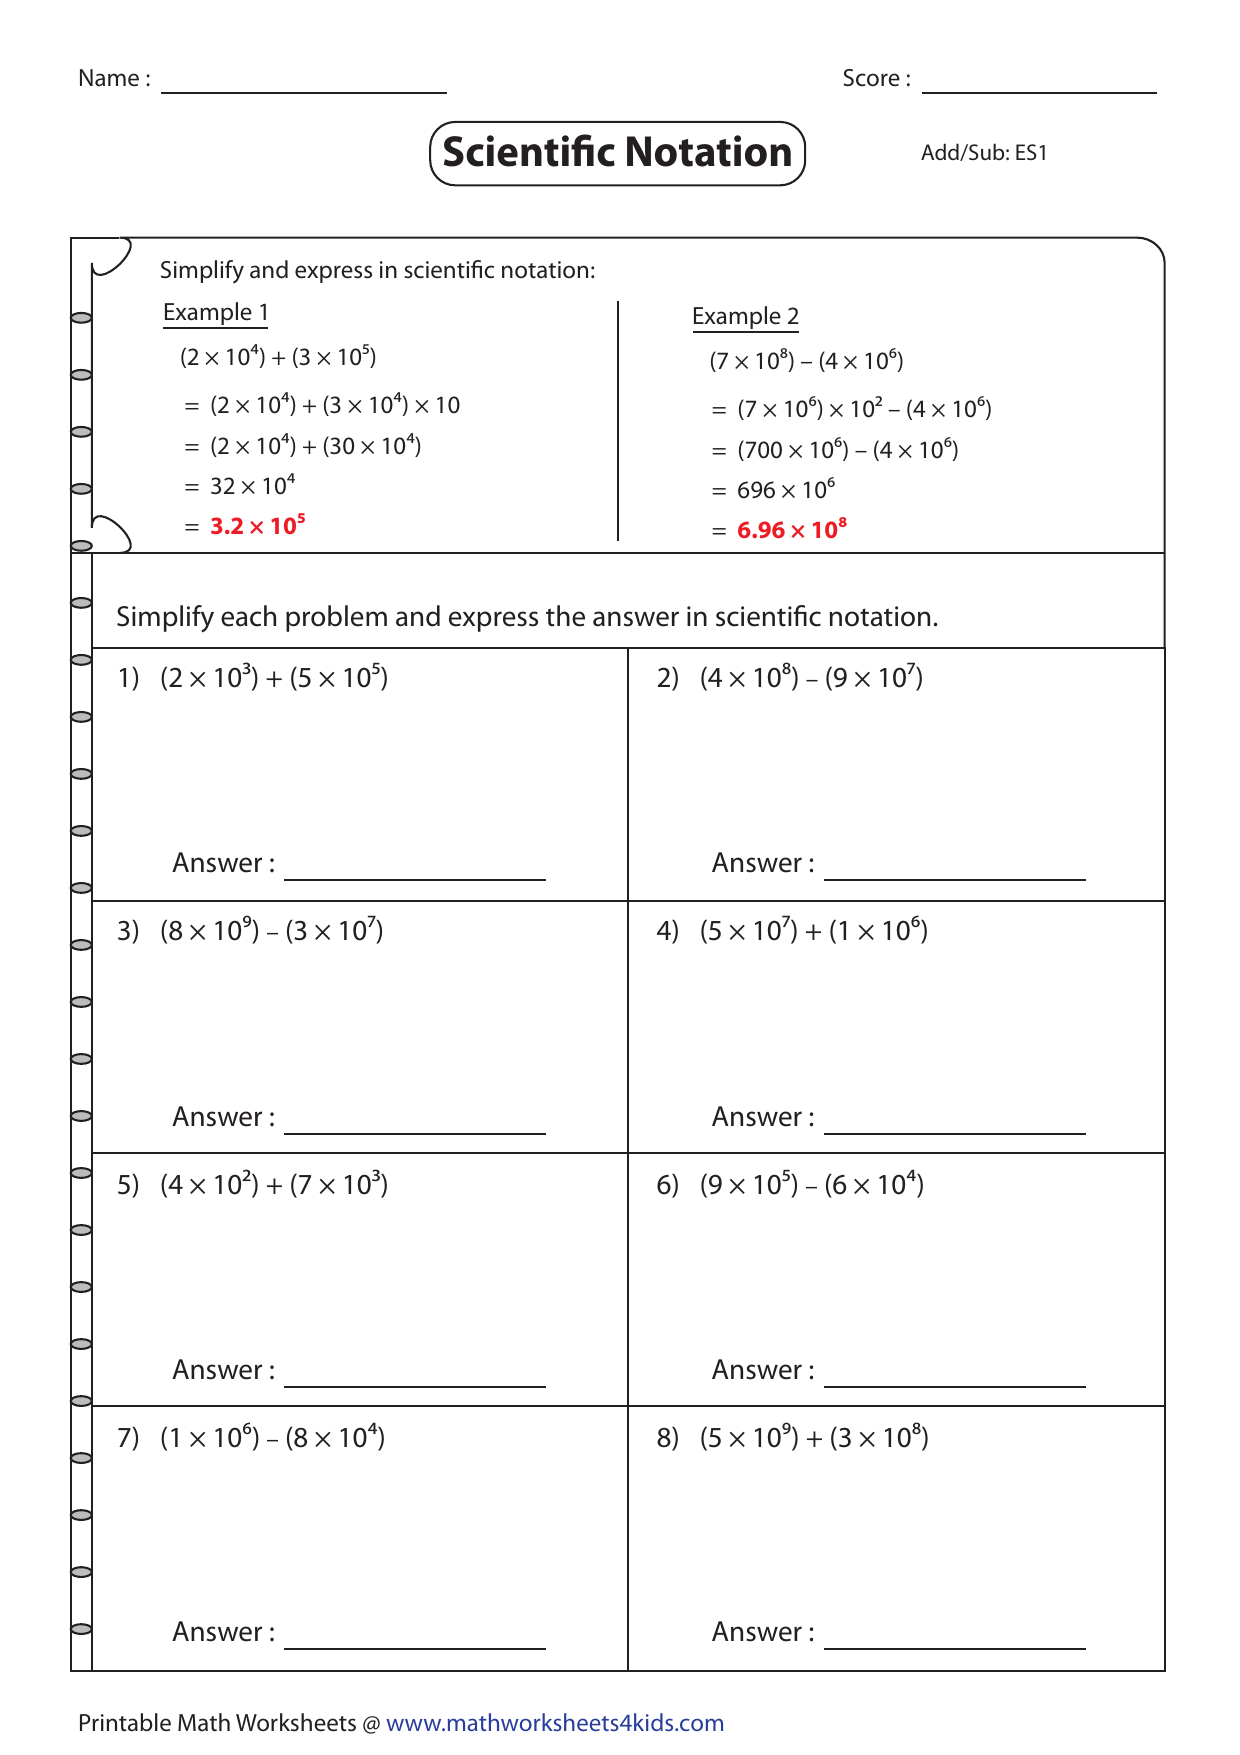 add-sub-easy22 With Scientific Notation Worksheet With Answers